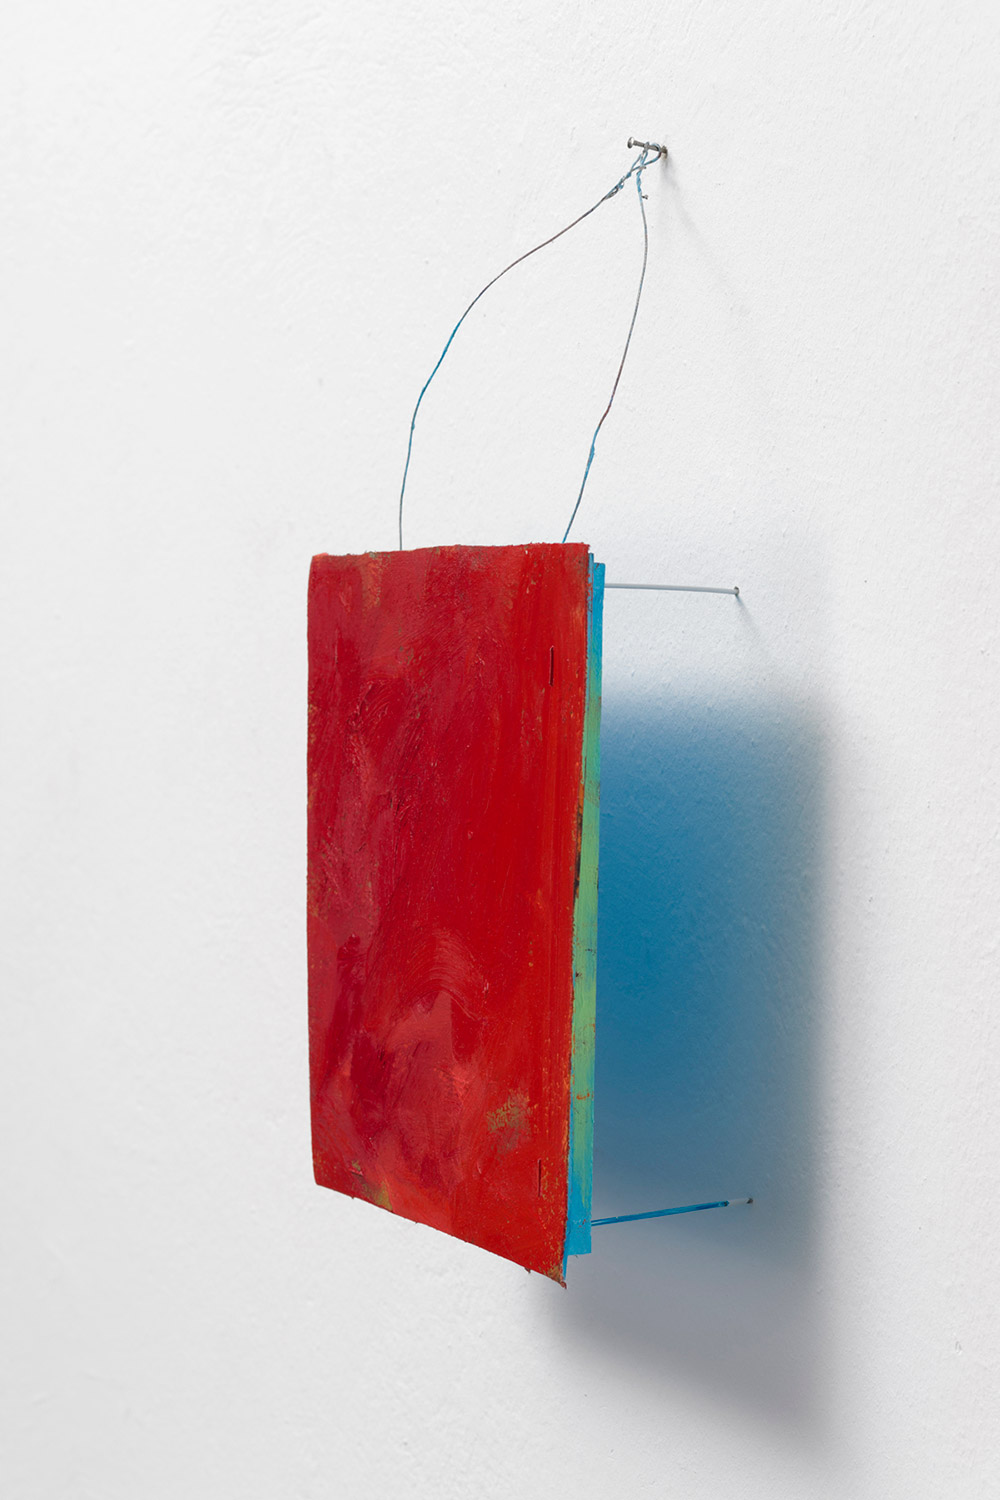   Possibly Now X   Oil on canvas, wood, wire 15 × 10.5 × 4 inches  38 × 27 × 10 cm&nbsp; 2014 